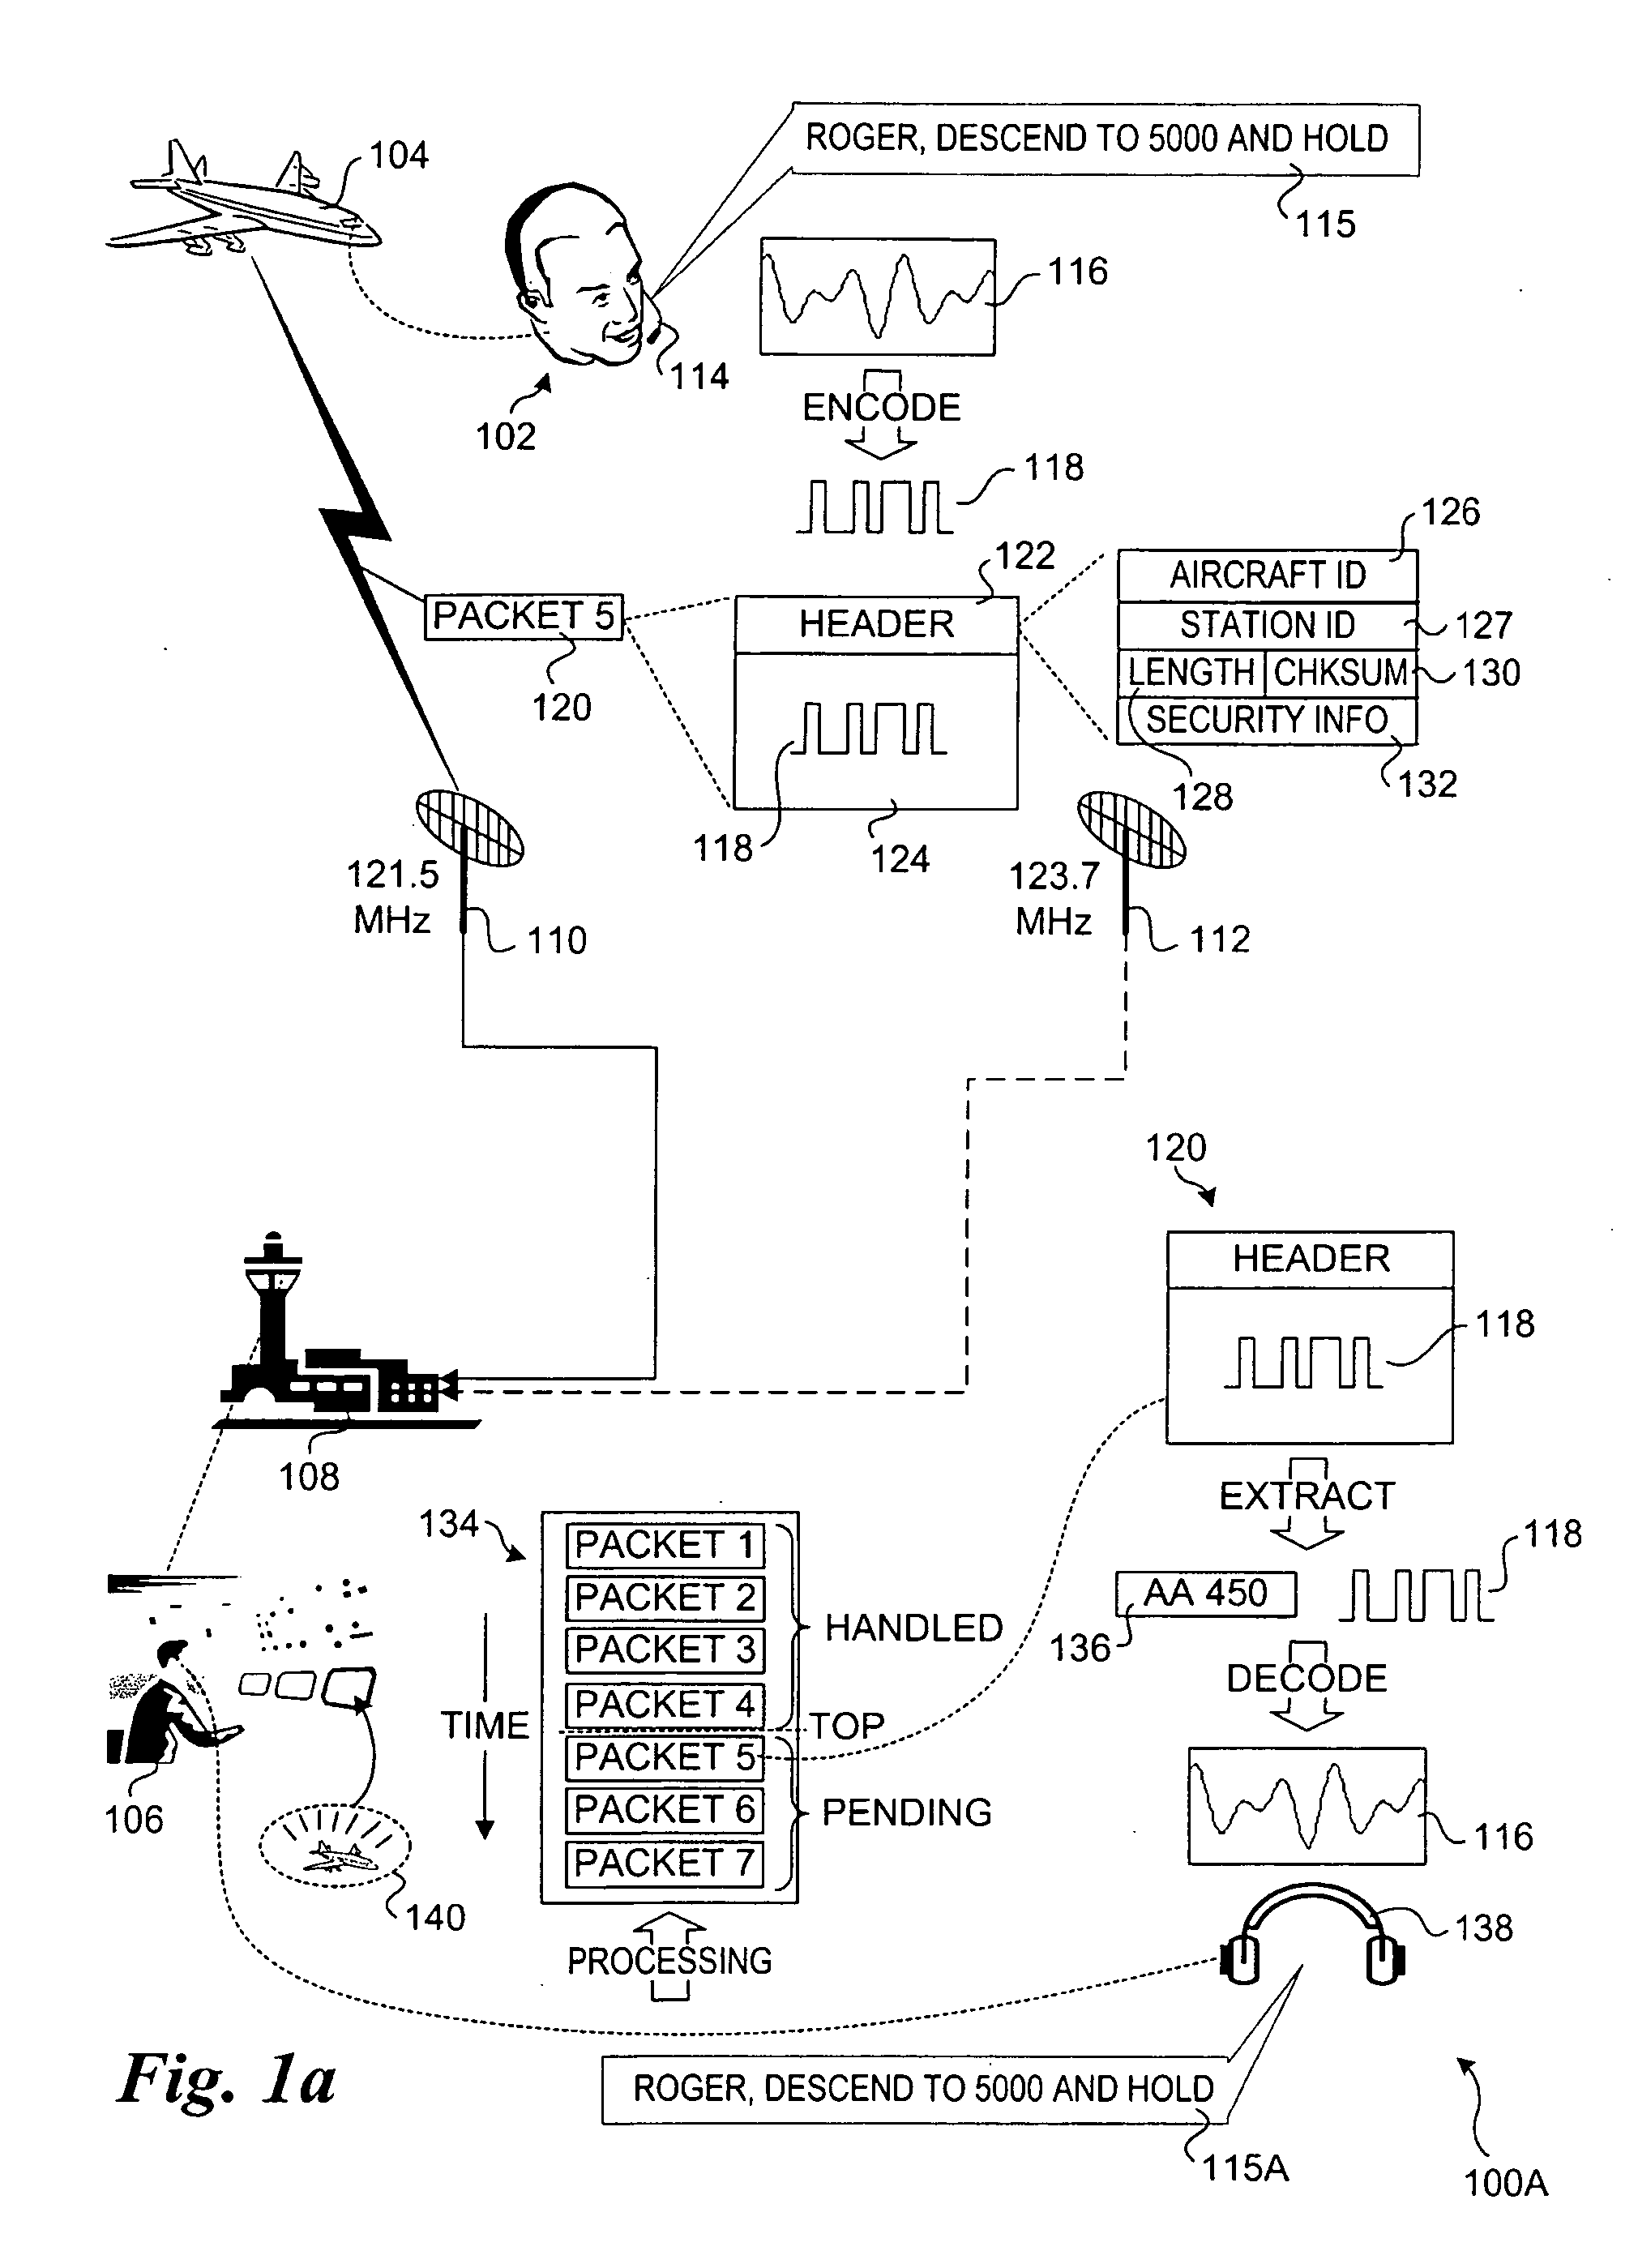 Packetized voice communication method and system